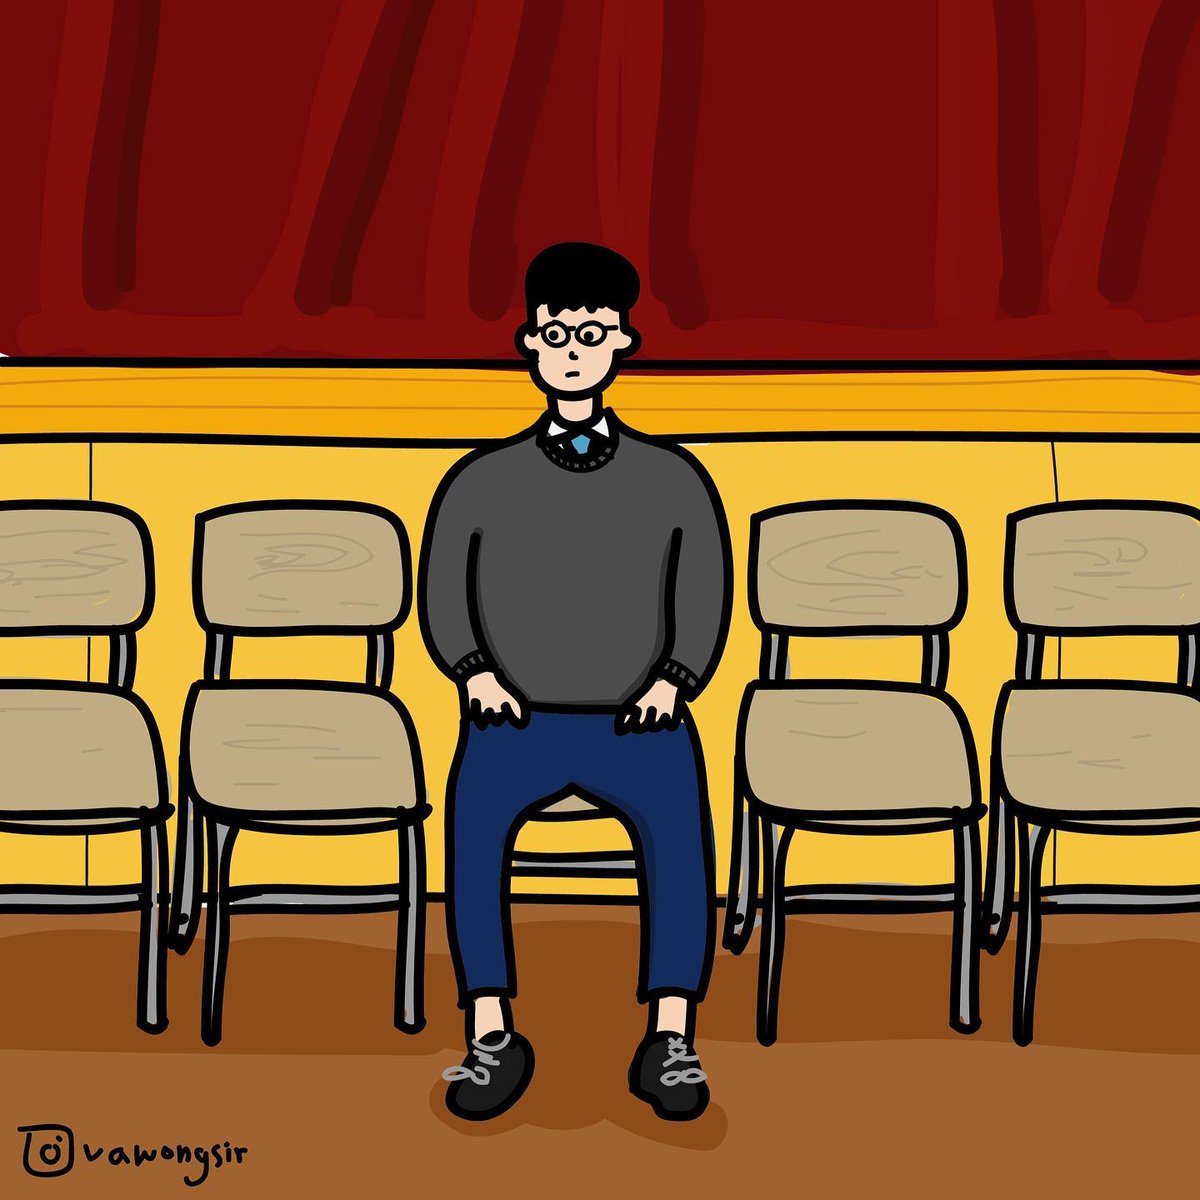 Wong was overwhelmed with guilt. He later drew a pic of himself sitting alone in the assembly hall. "Promise me, you will all be here for the class photo. I will wait for you."